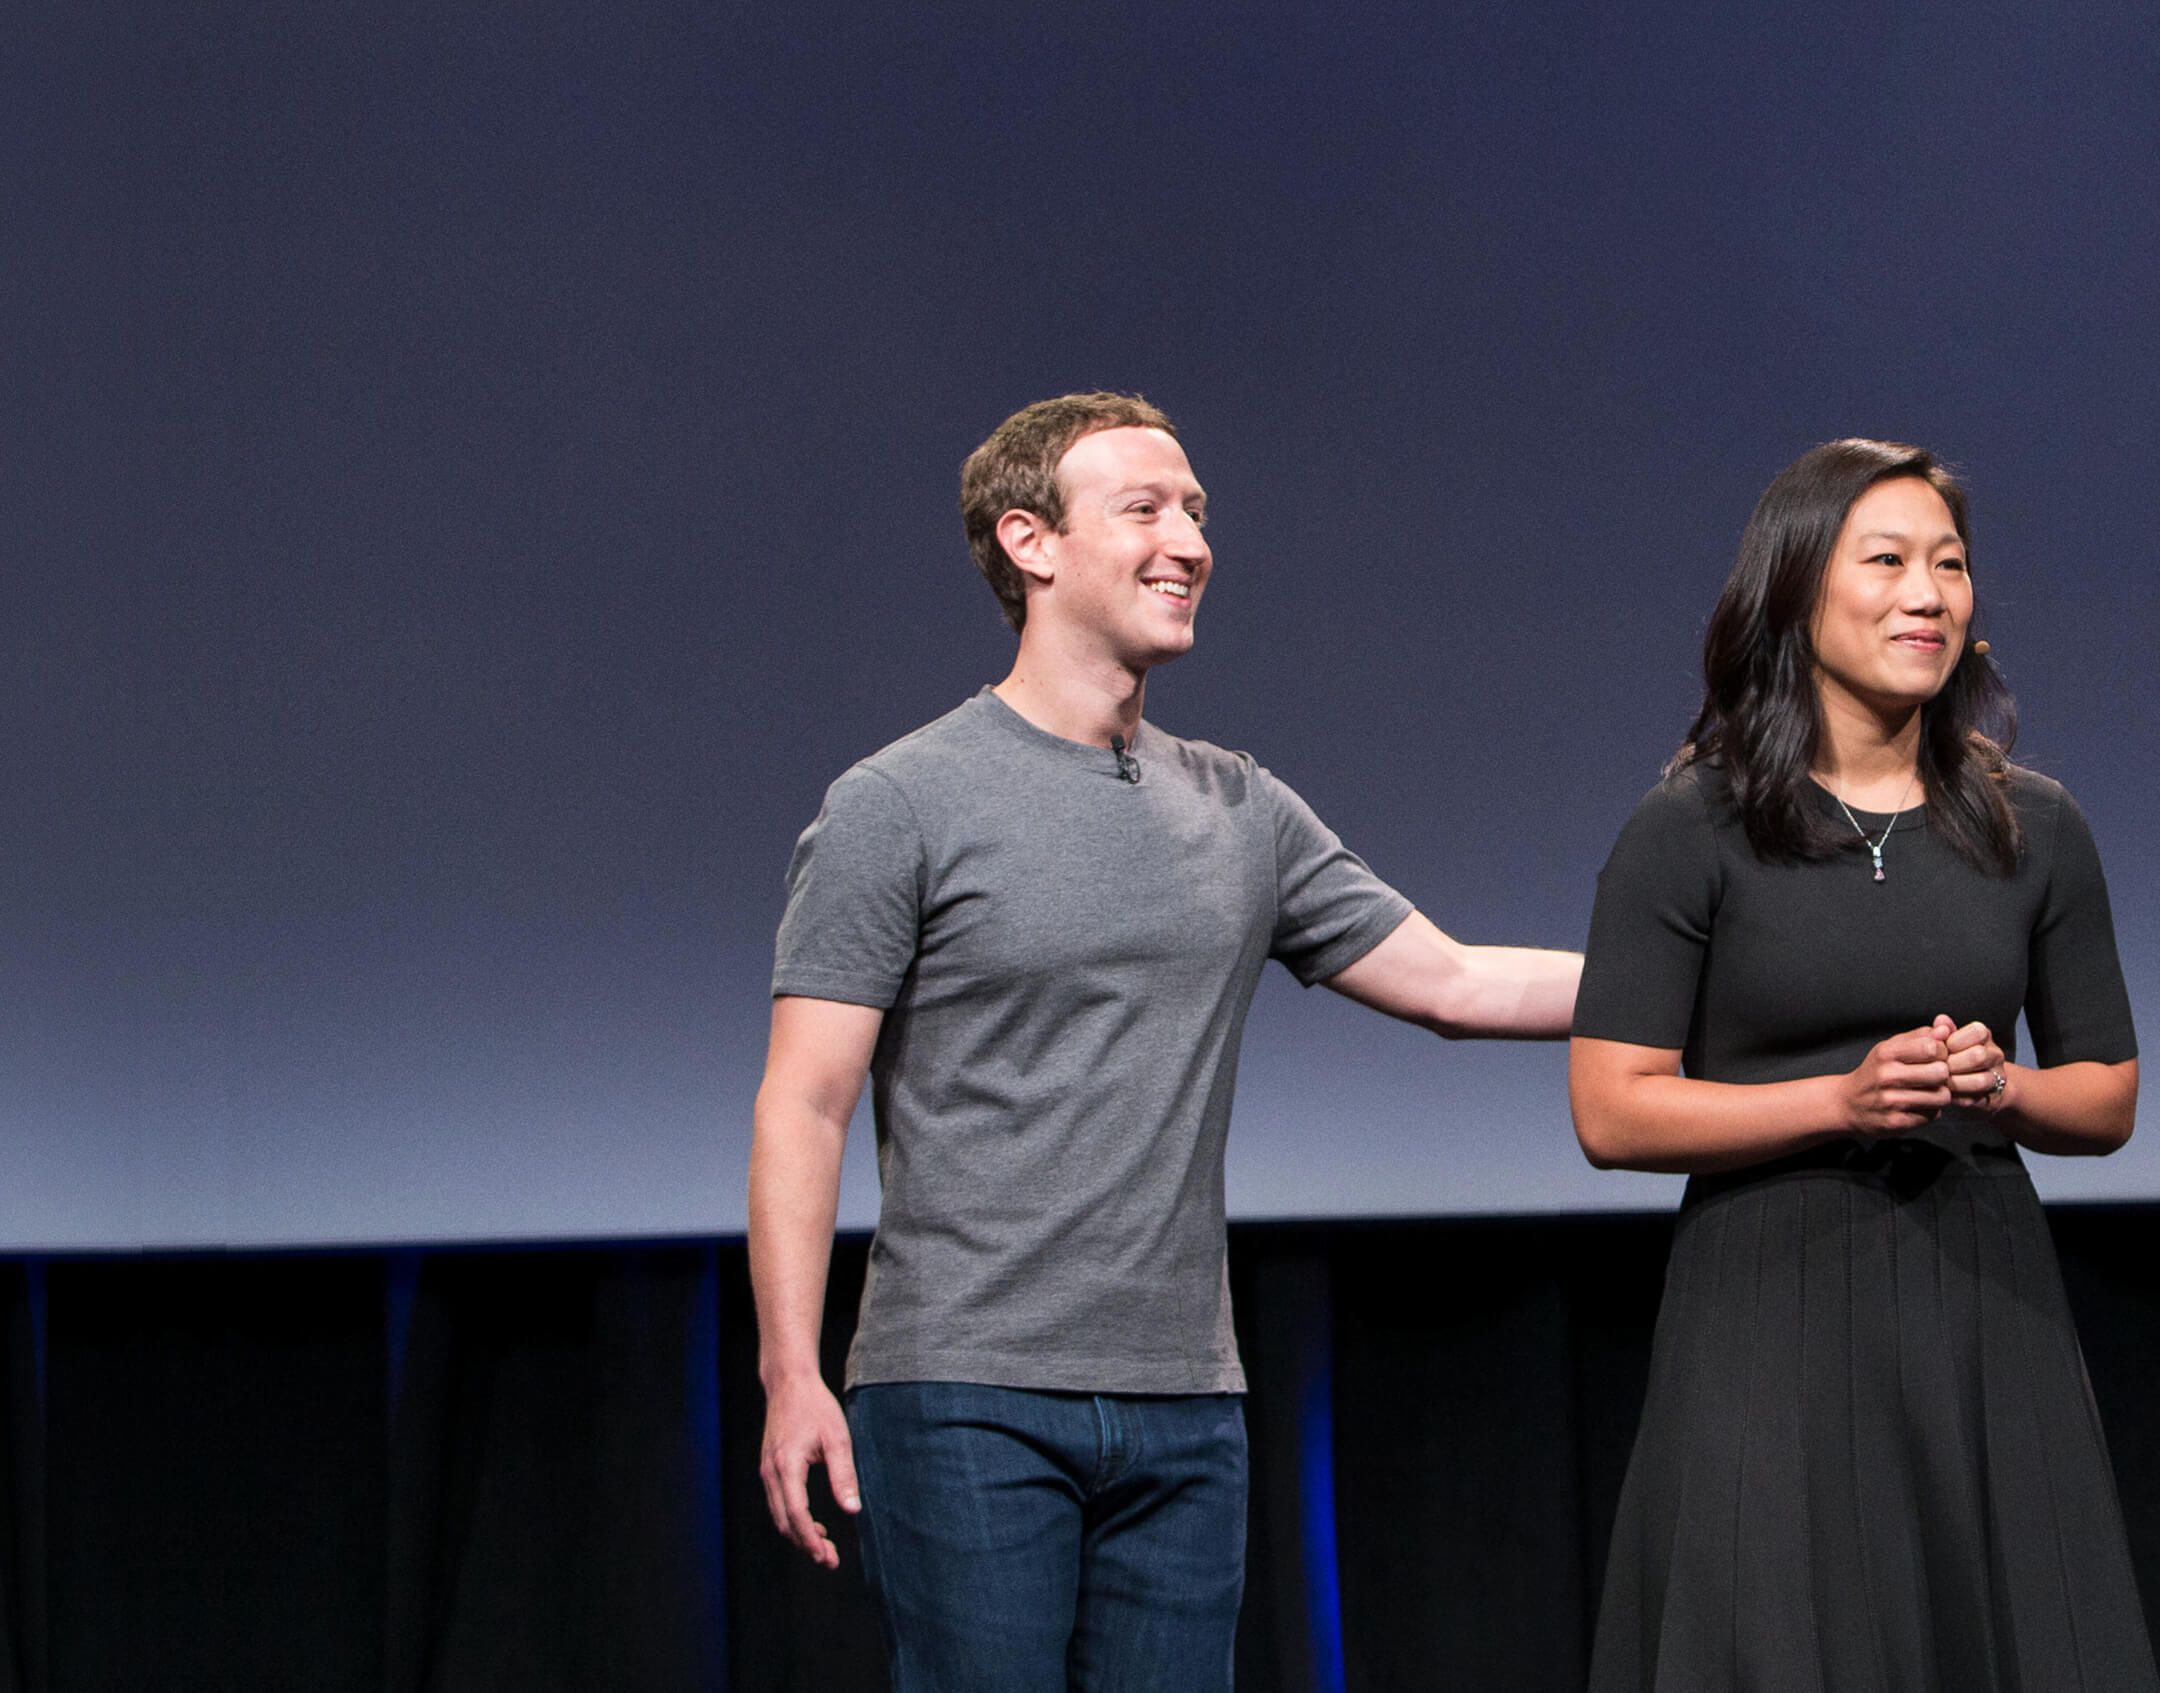 Our Co-founders and Co-CEOs, Mark Zuckerberg and Priscilla Chan, launching our work in science and announcing support of the Chan Zuckerberg Biohub at the University of California, San Francisco.